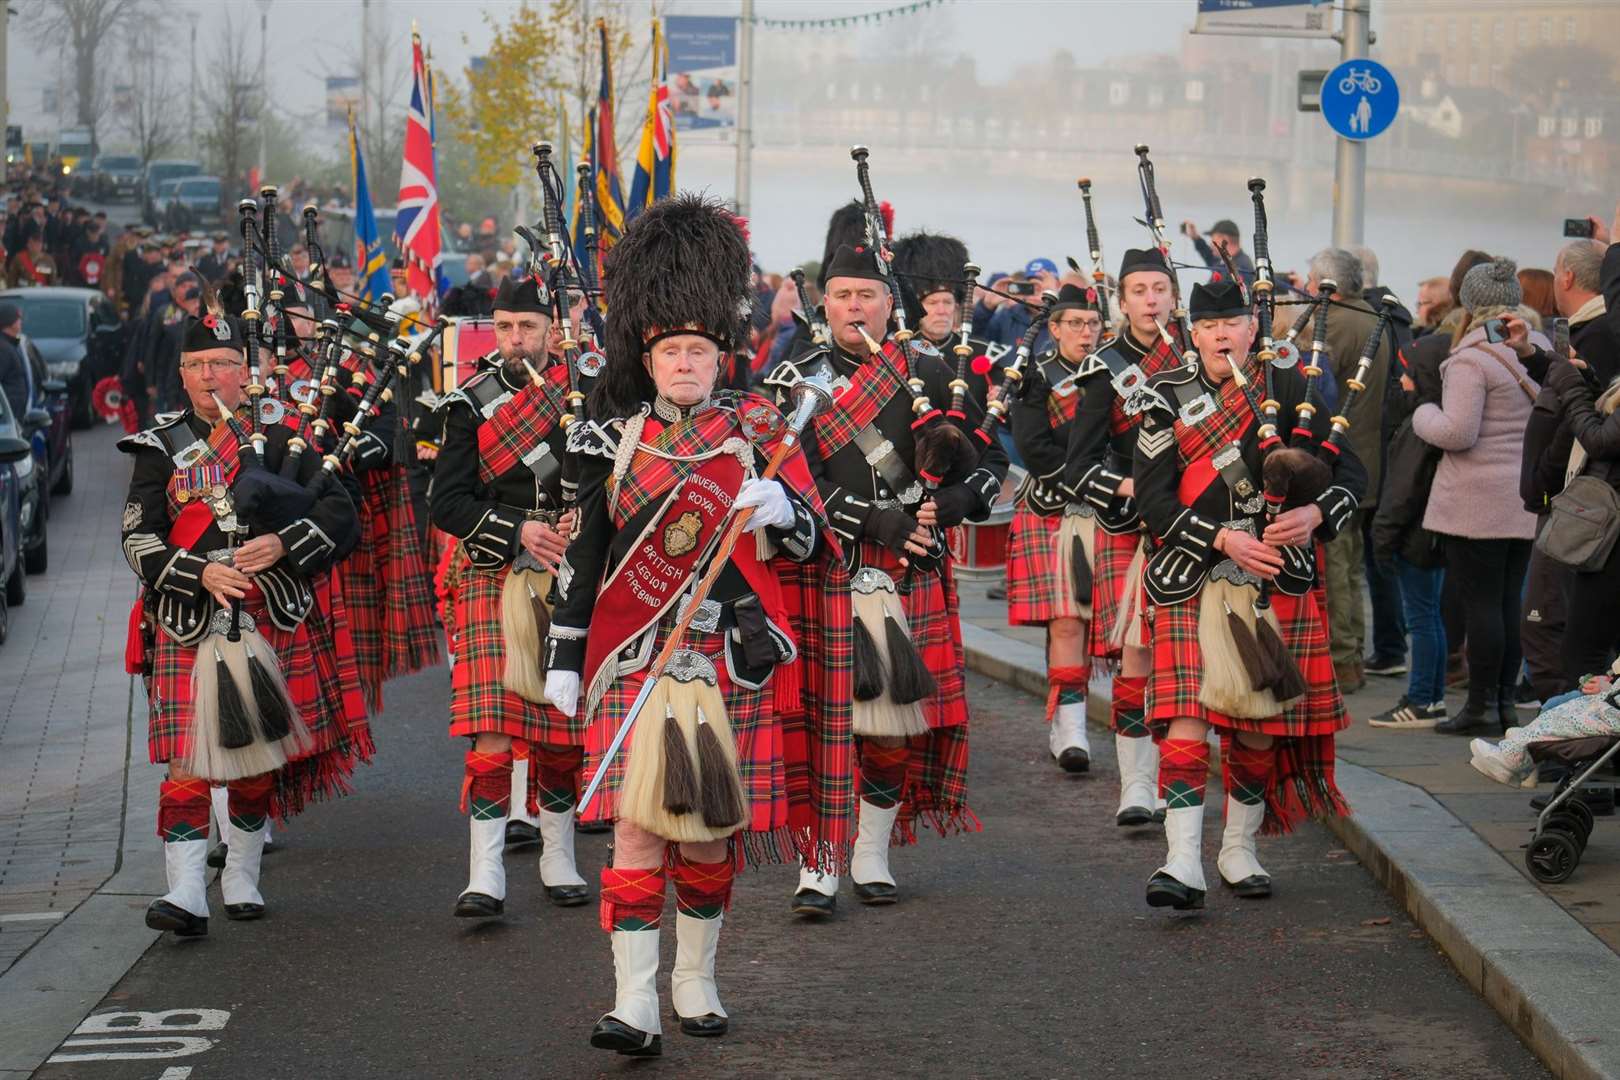 The Remembrance Sunday parade in Inverness. Picture: Alexander Williamson